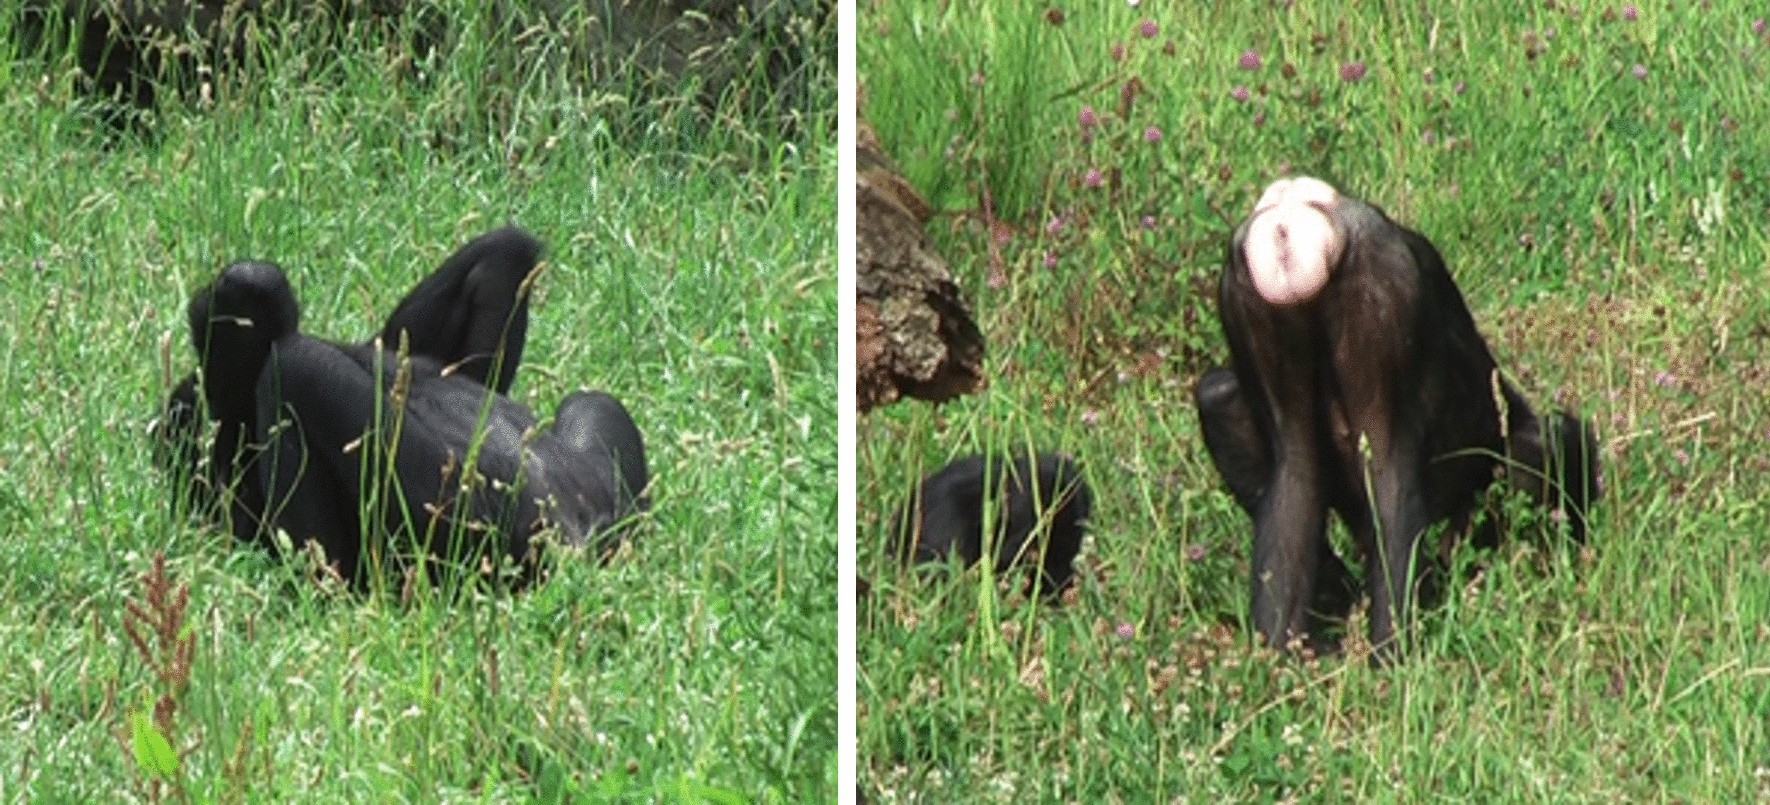 Foraging postures are a potential communicative signal in female bonobos |  Scientific Reports